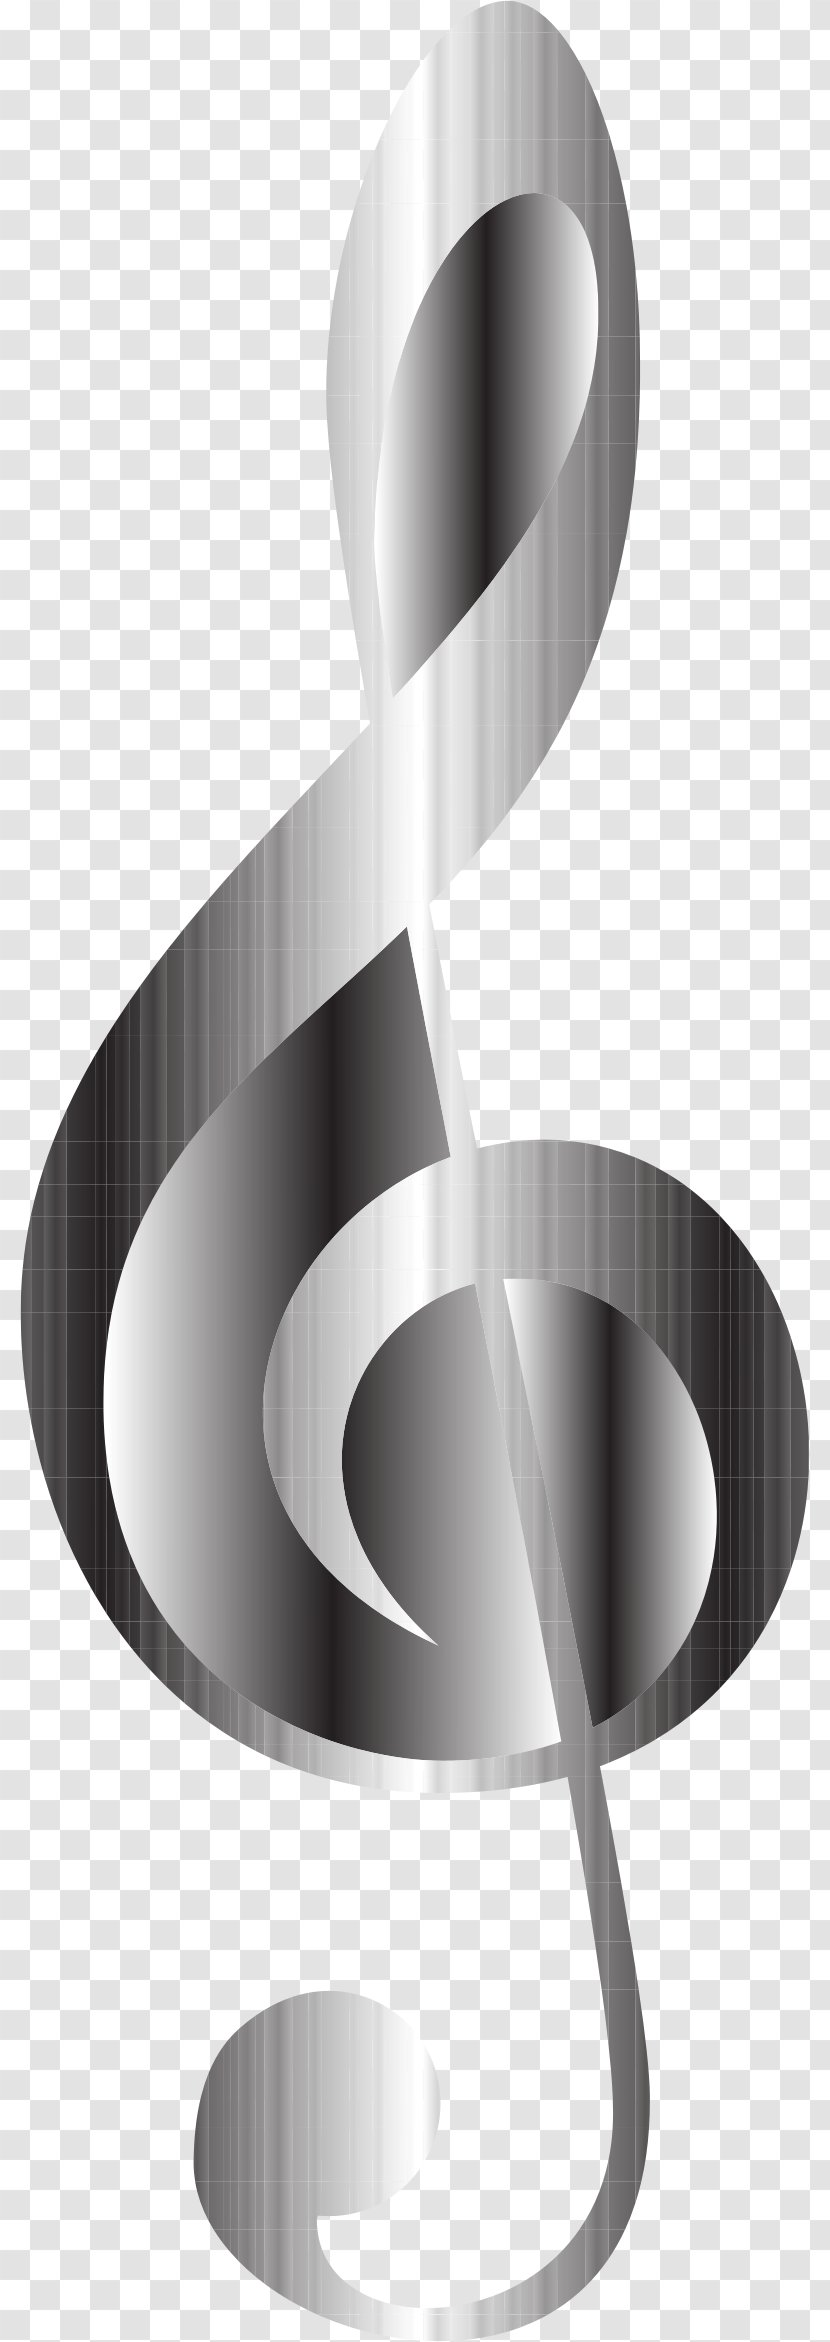 Monochrome Photography Black And White Clef Clip Art Transparent PNG